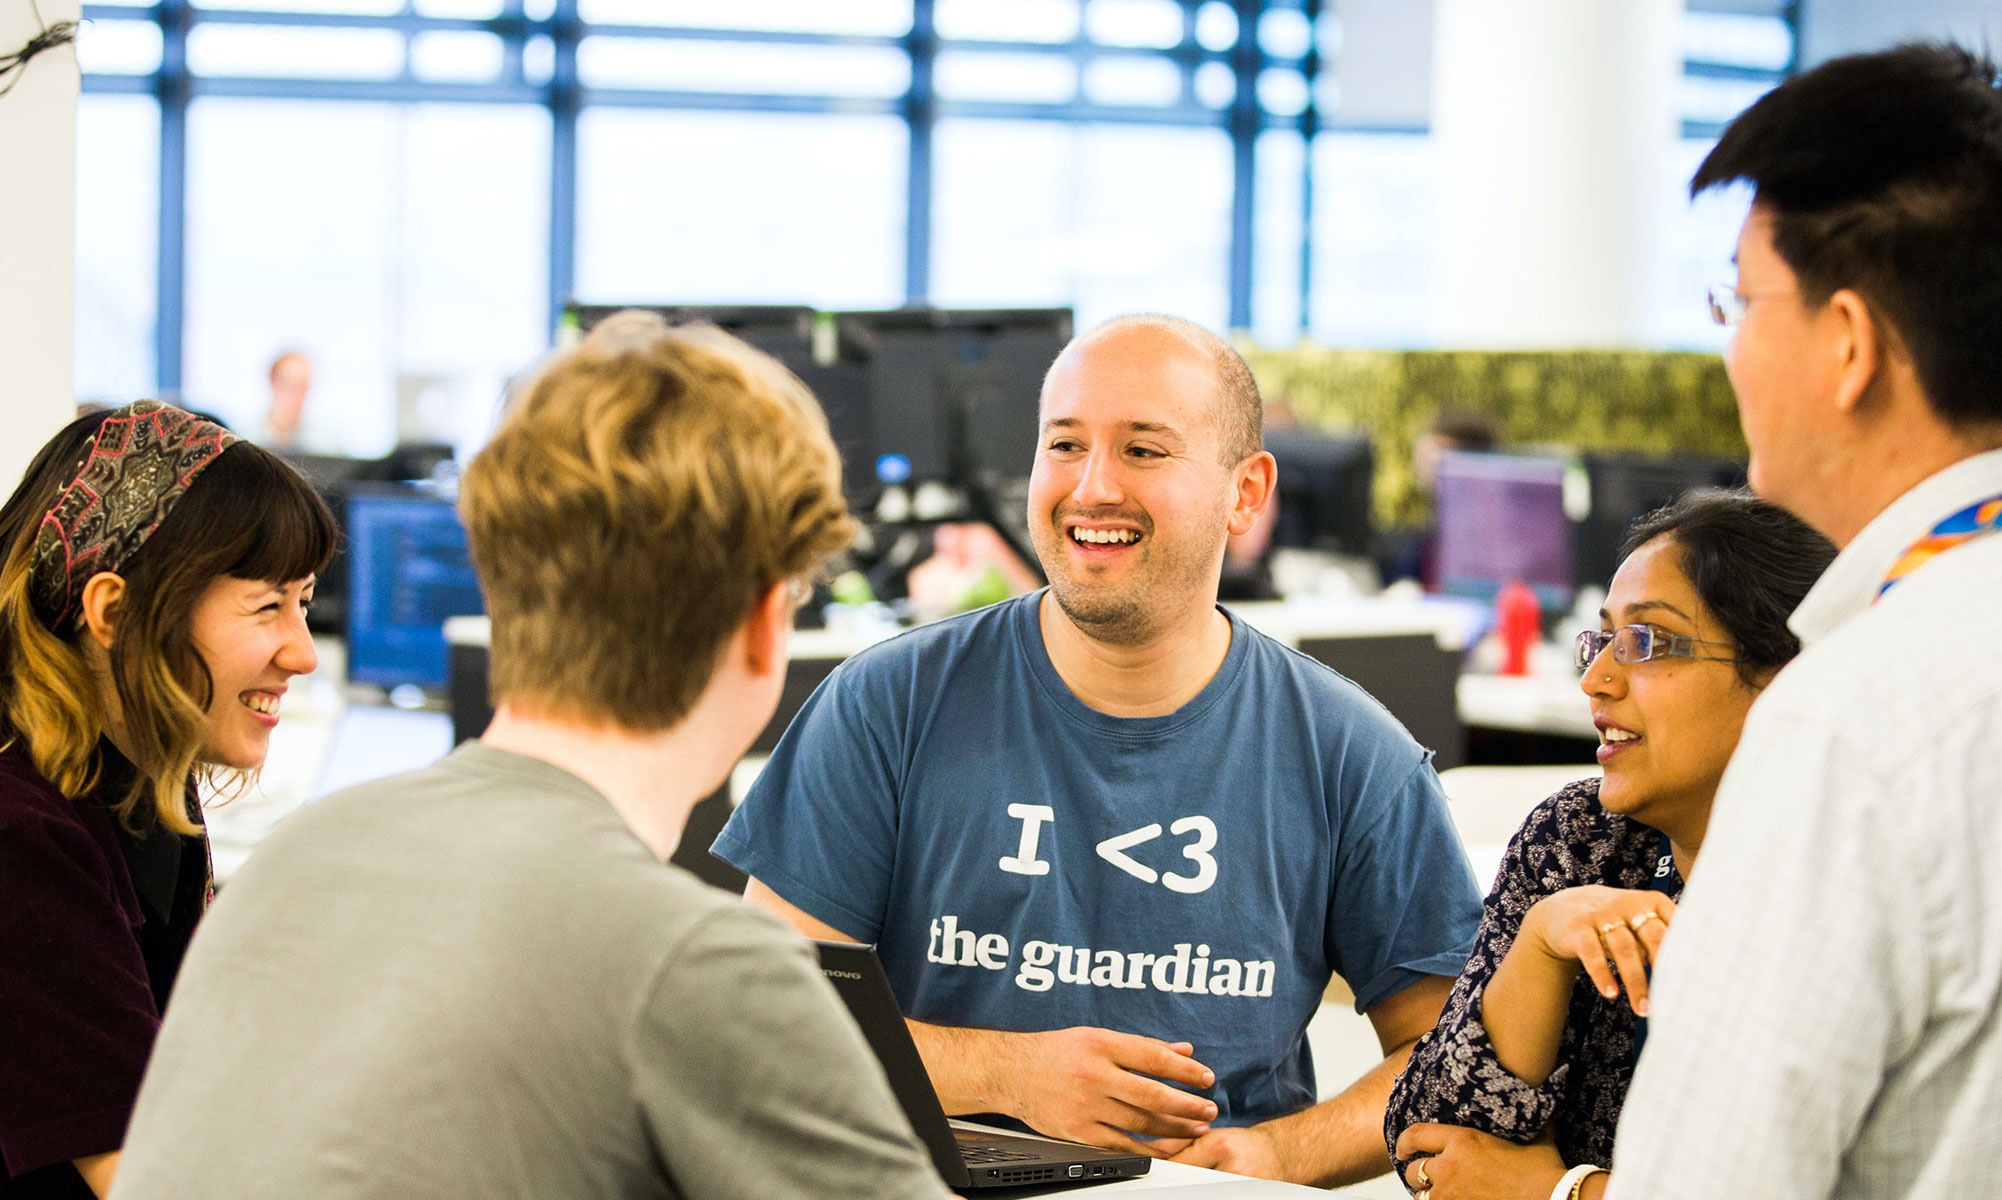 Five people gathered around a table, with a man in the centre wearing an 'I heart the Guardian' tshirt